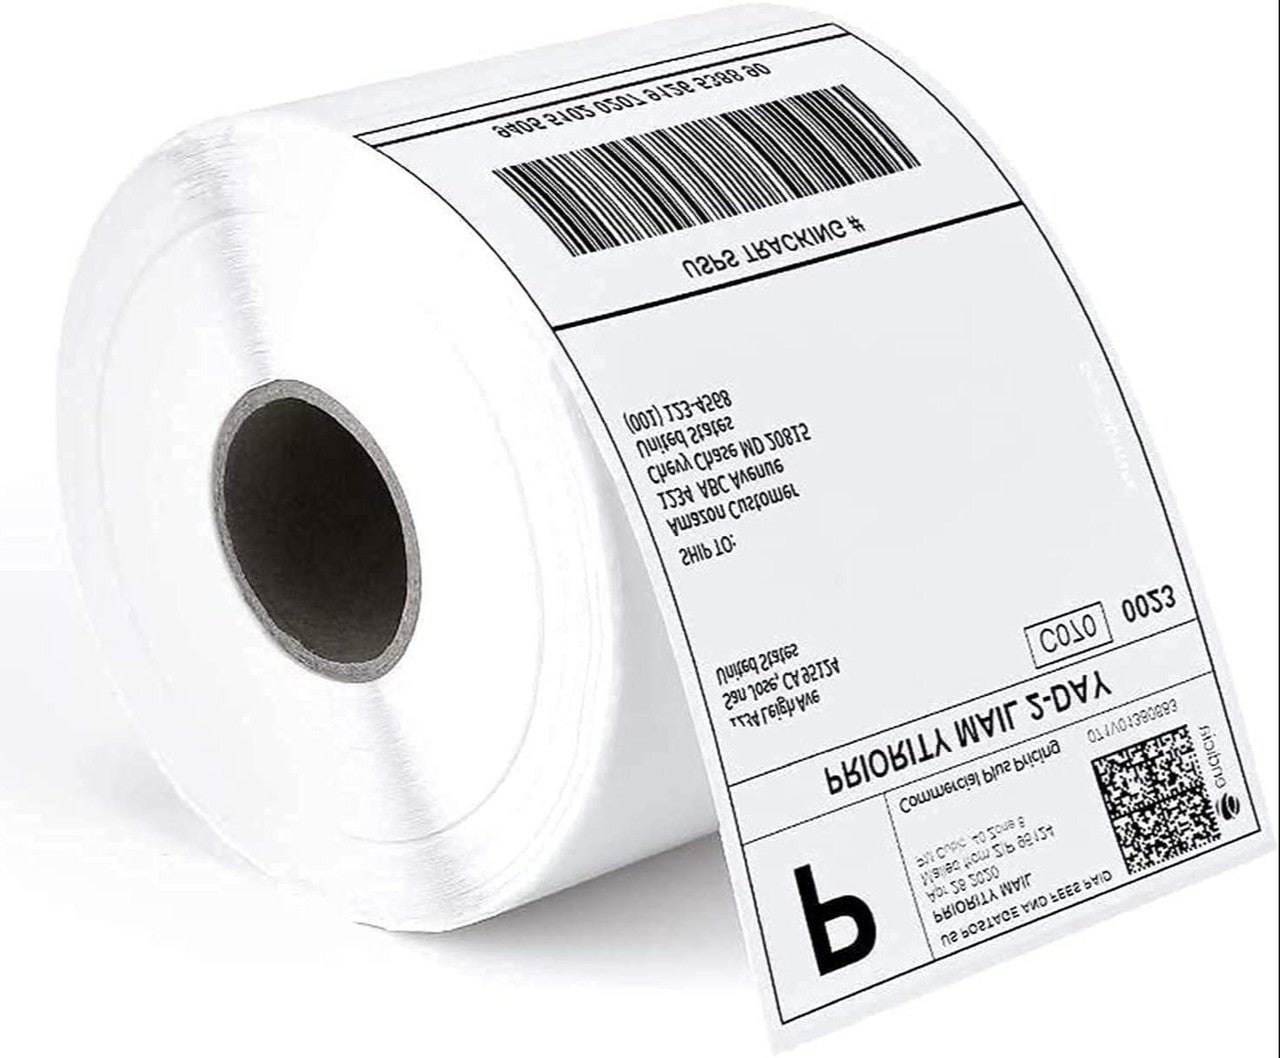 Thermal Labels Rolls 100mm X 150mm - 1000 Labels per Roll - Office Catch